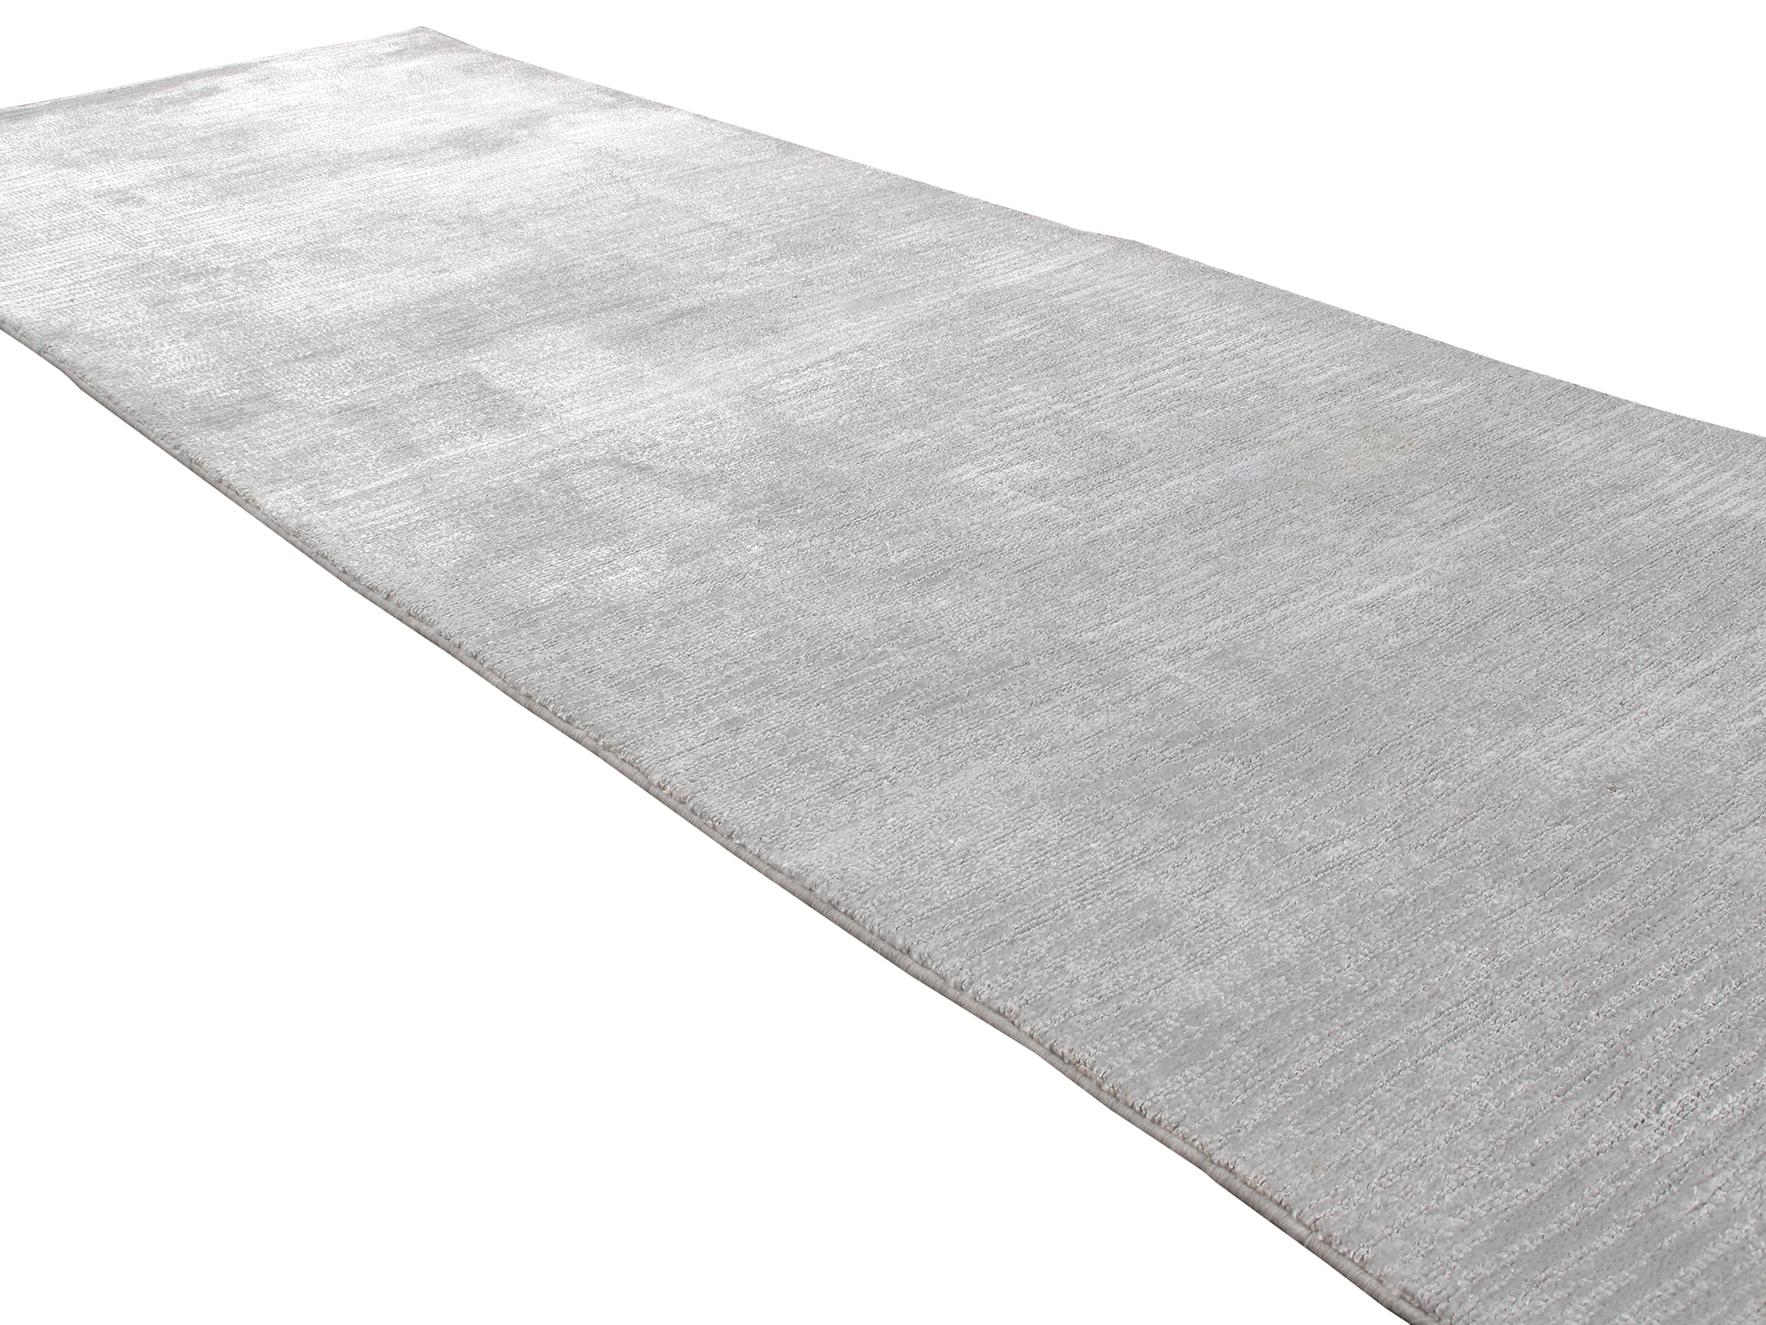 This is a beautiful, luxurious modern rug with a great deal of texture as it features a cut and loop design. It has a tone-on-tone silver/grey color and is comprised of bamboo silk. Custom options are available in any size and color.